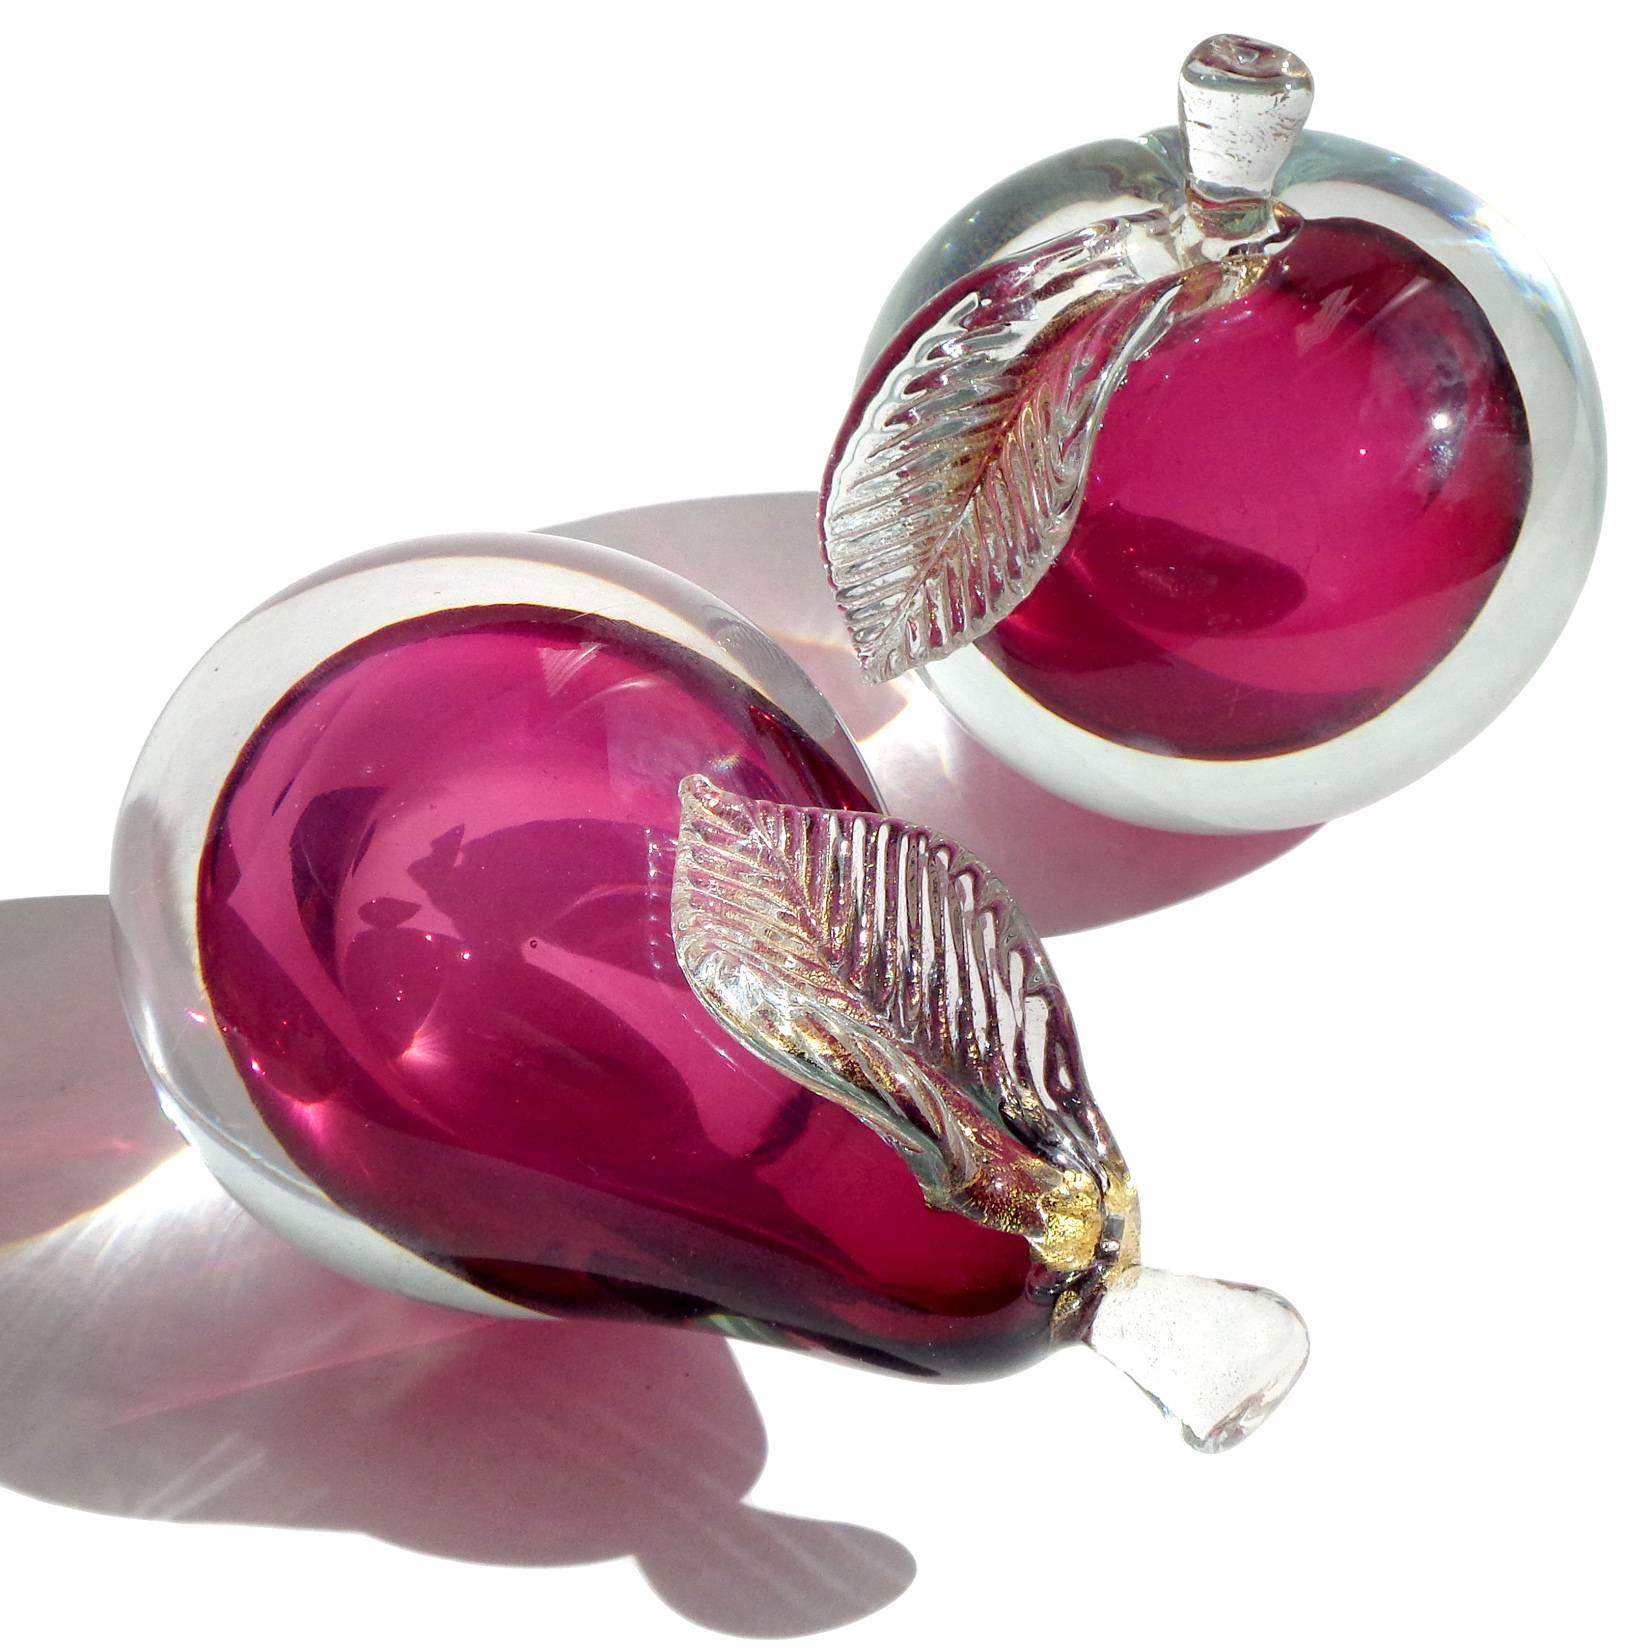 Free shipping worldwide! See details below description.

Beautiful Murano handblown, Sommerso cranberry red art glass pear and apple fruit bookends. Documented to designer Alfredo Barbini. The pieces have two polished ends, so they can be